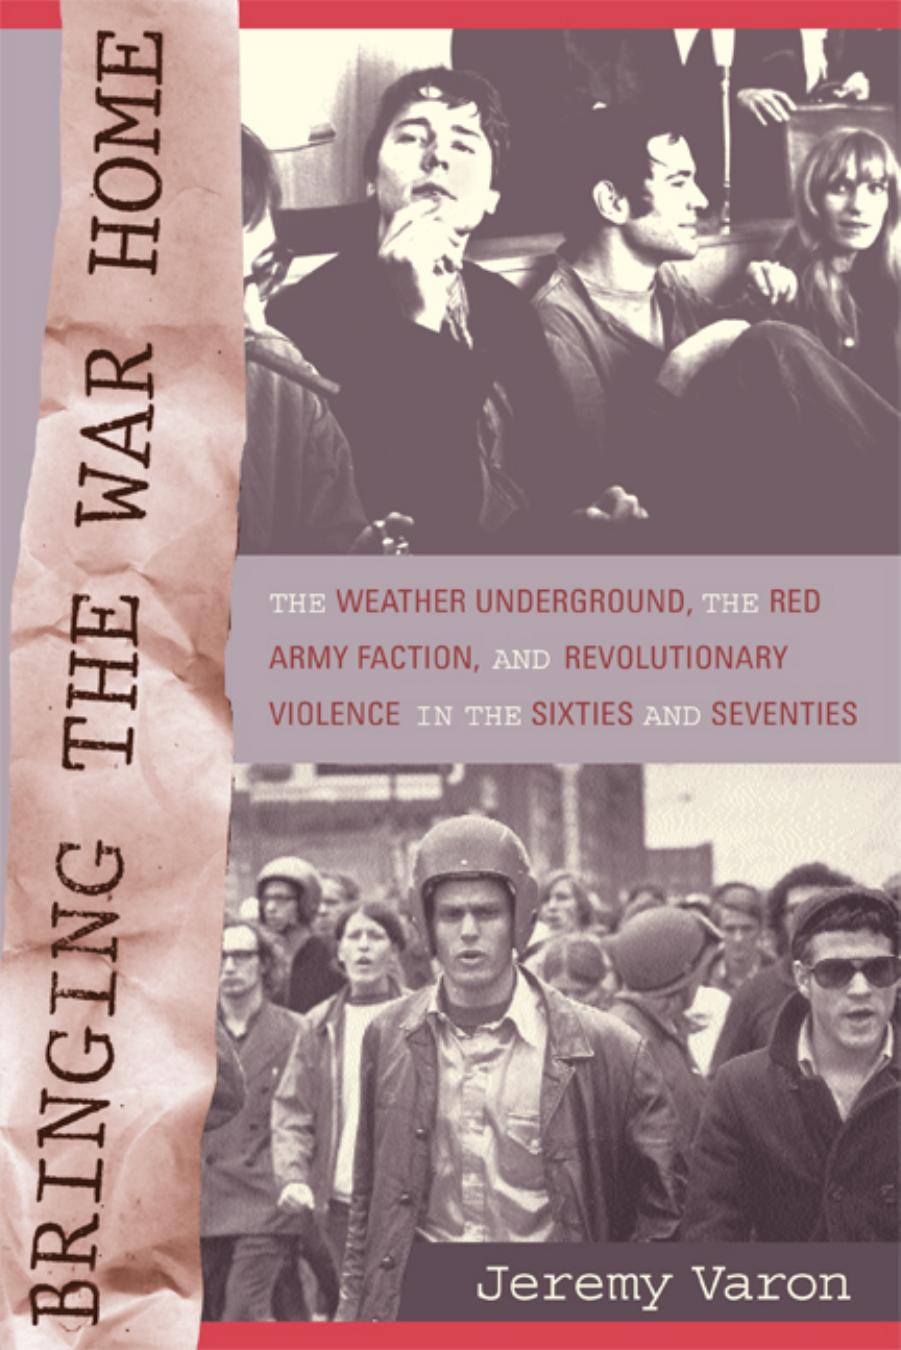 Bringing the War Home: The Weather Underground, the Red Army Faction, and Revolutionary Violence in the Sixties and Seventies by Jeremy Varon